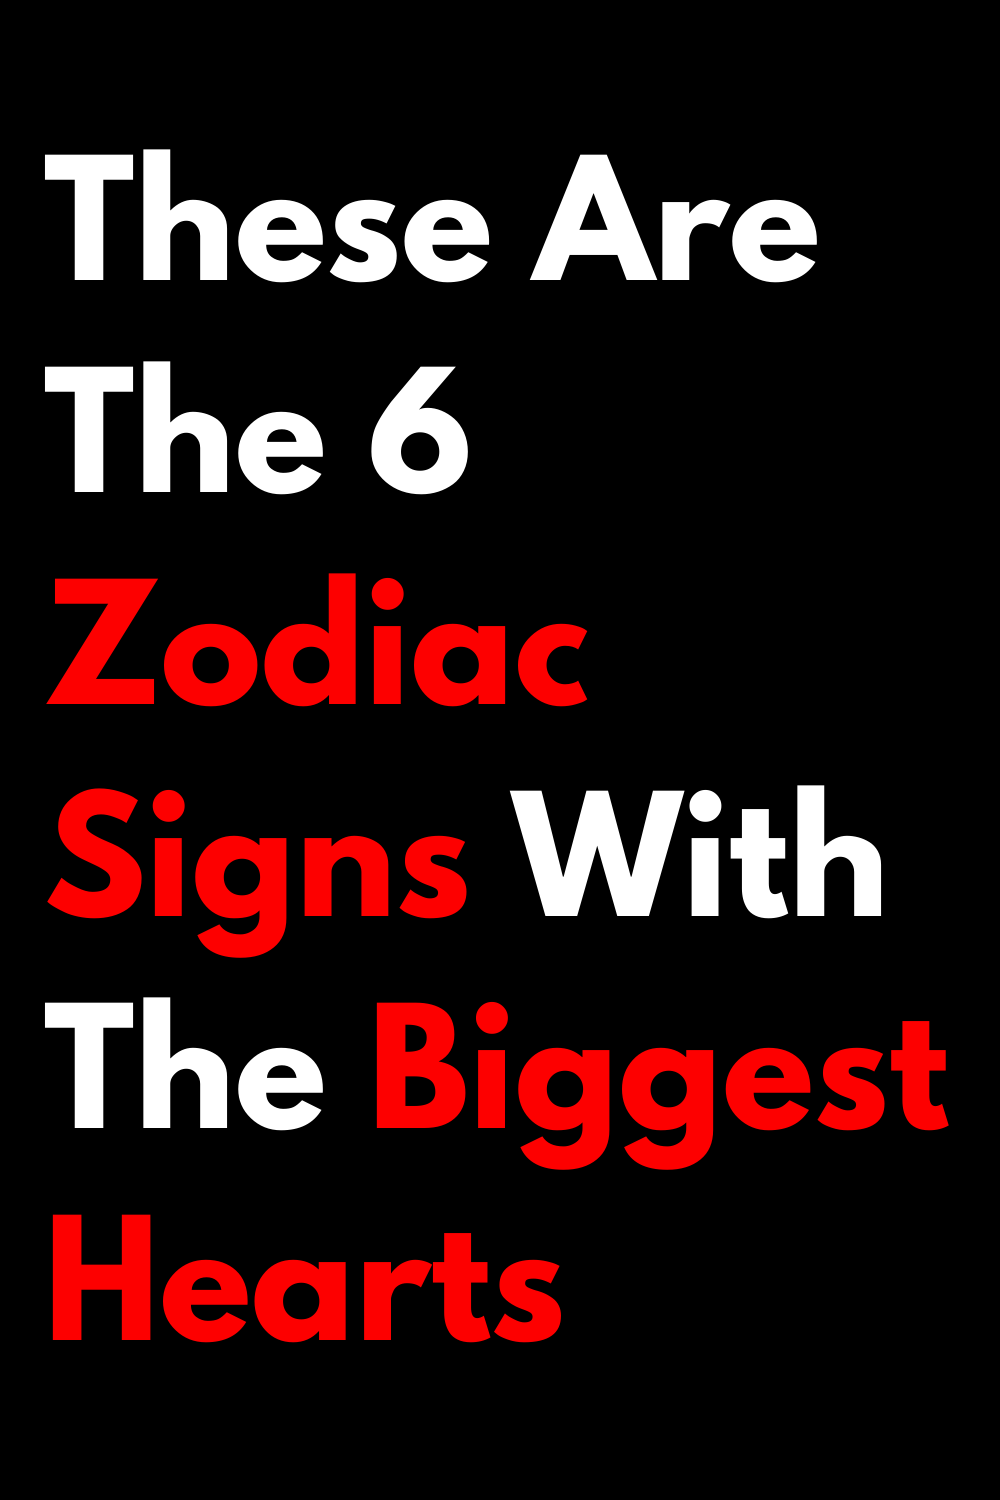 These Are The 6 Zodiac Signs With The Biggest Hearts